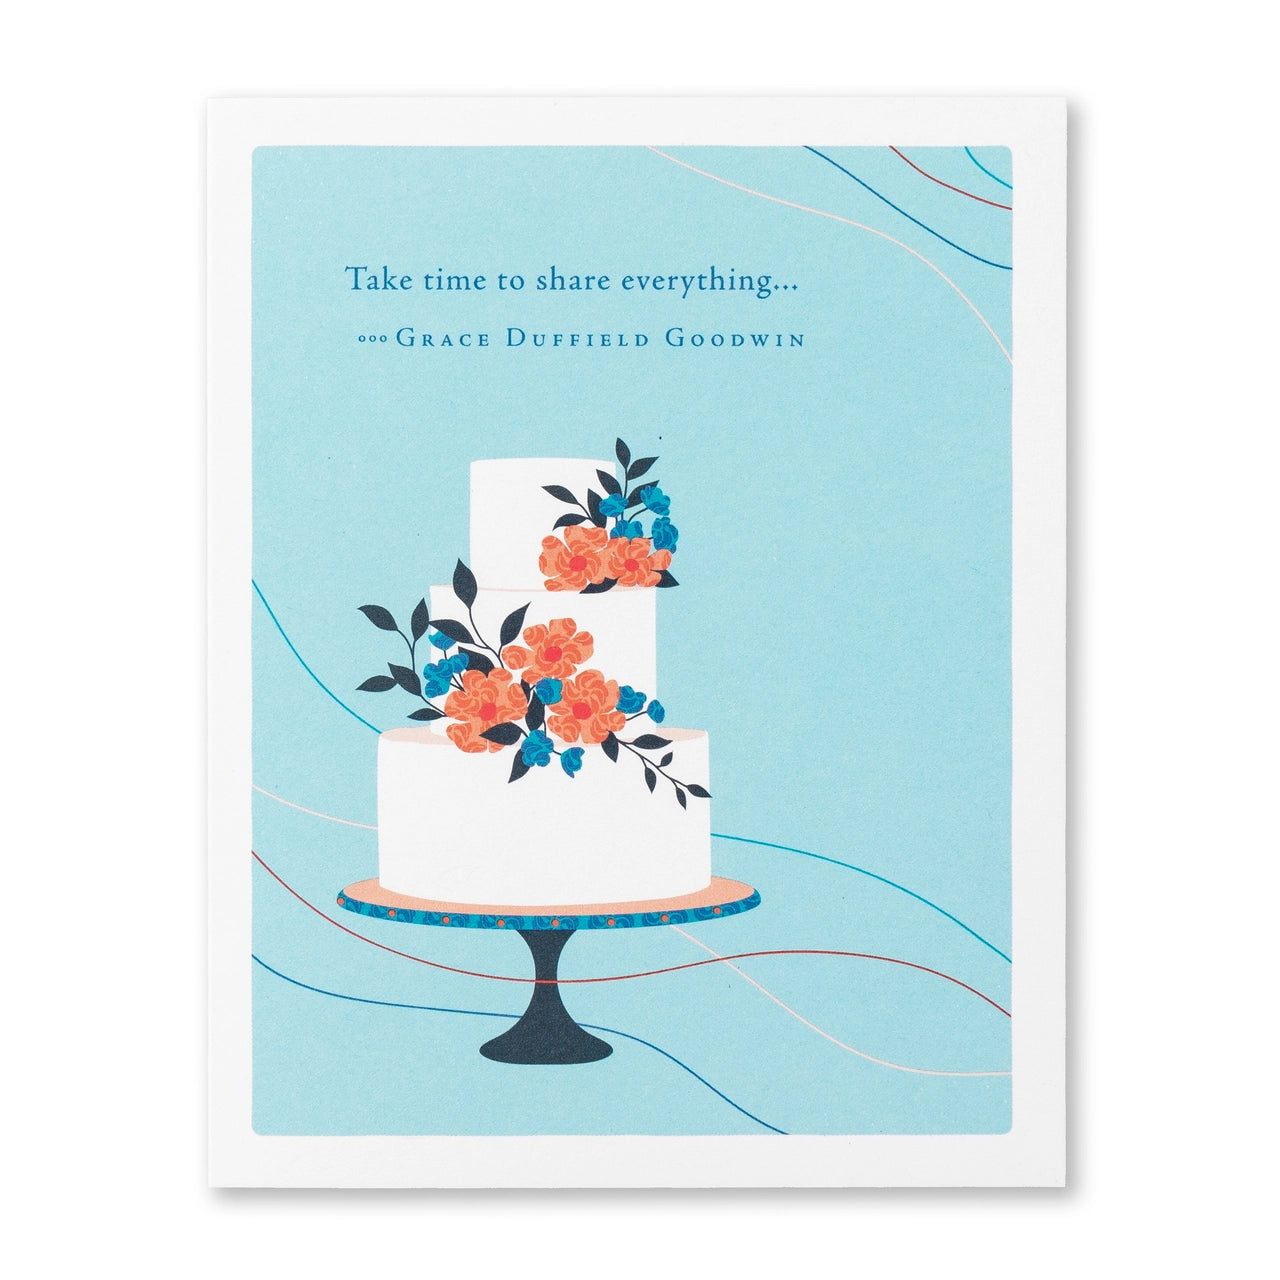 Positively Green Card - Share Everything (Goodwin) - Wedding